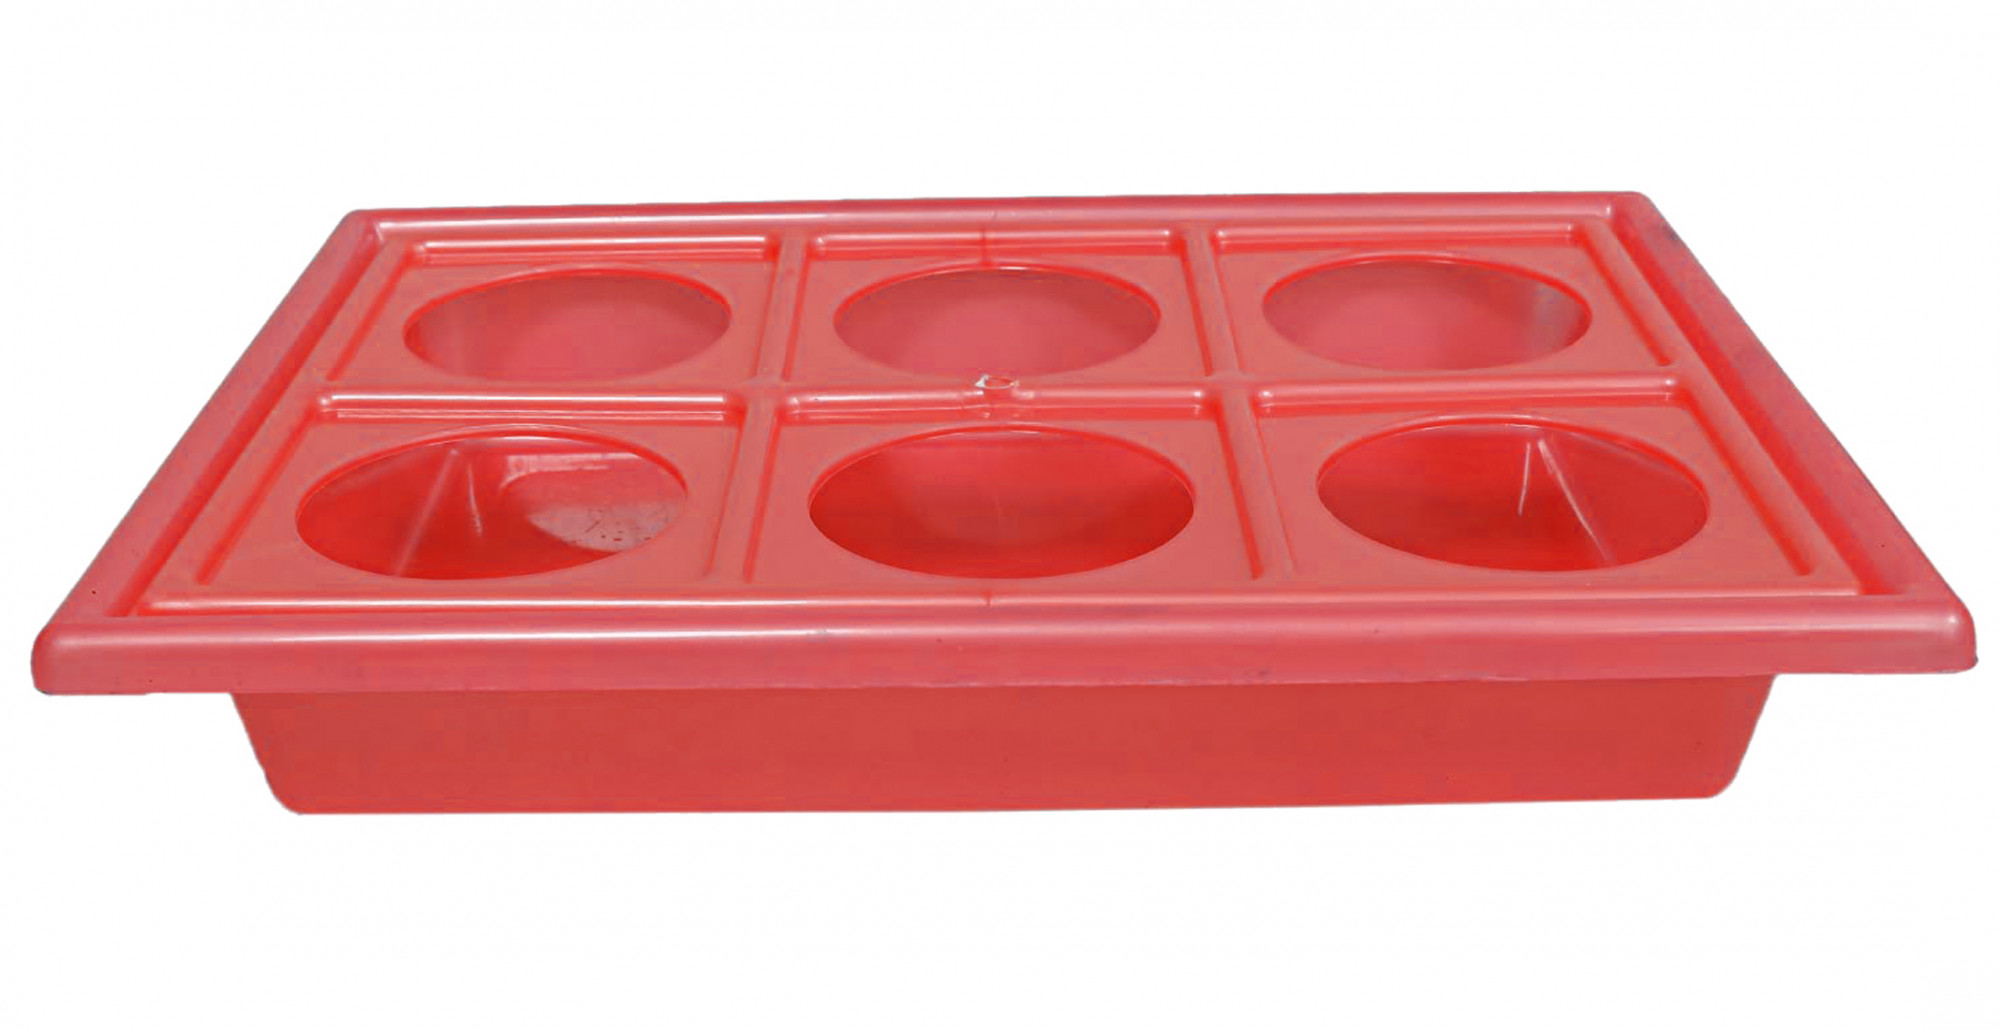 Kuber Industries Tray with Cutout Handles, Cup Display for Kitchenware, Plastic Glass Holder, One Size, 6 Slots (Pink)